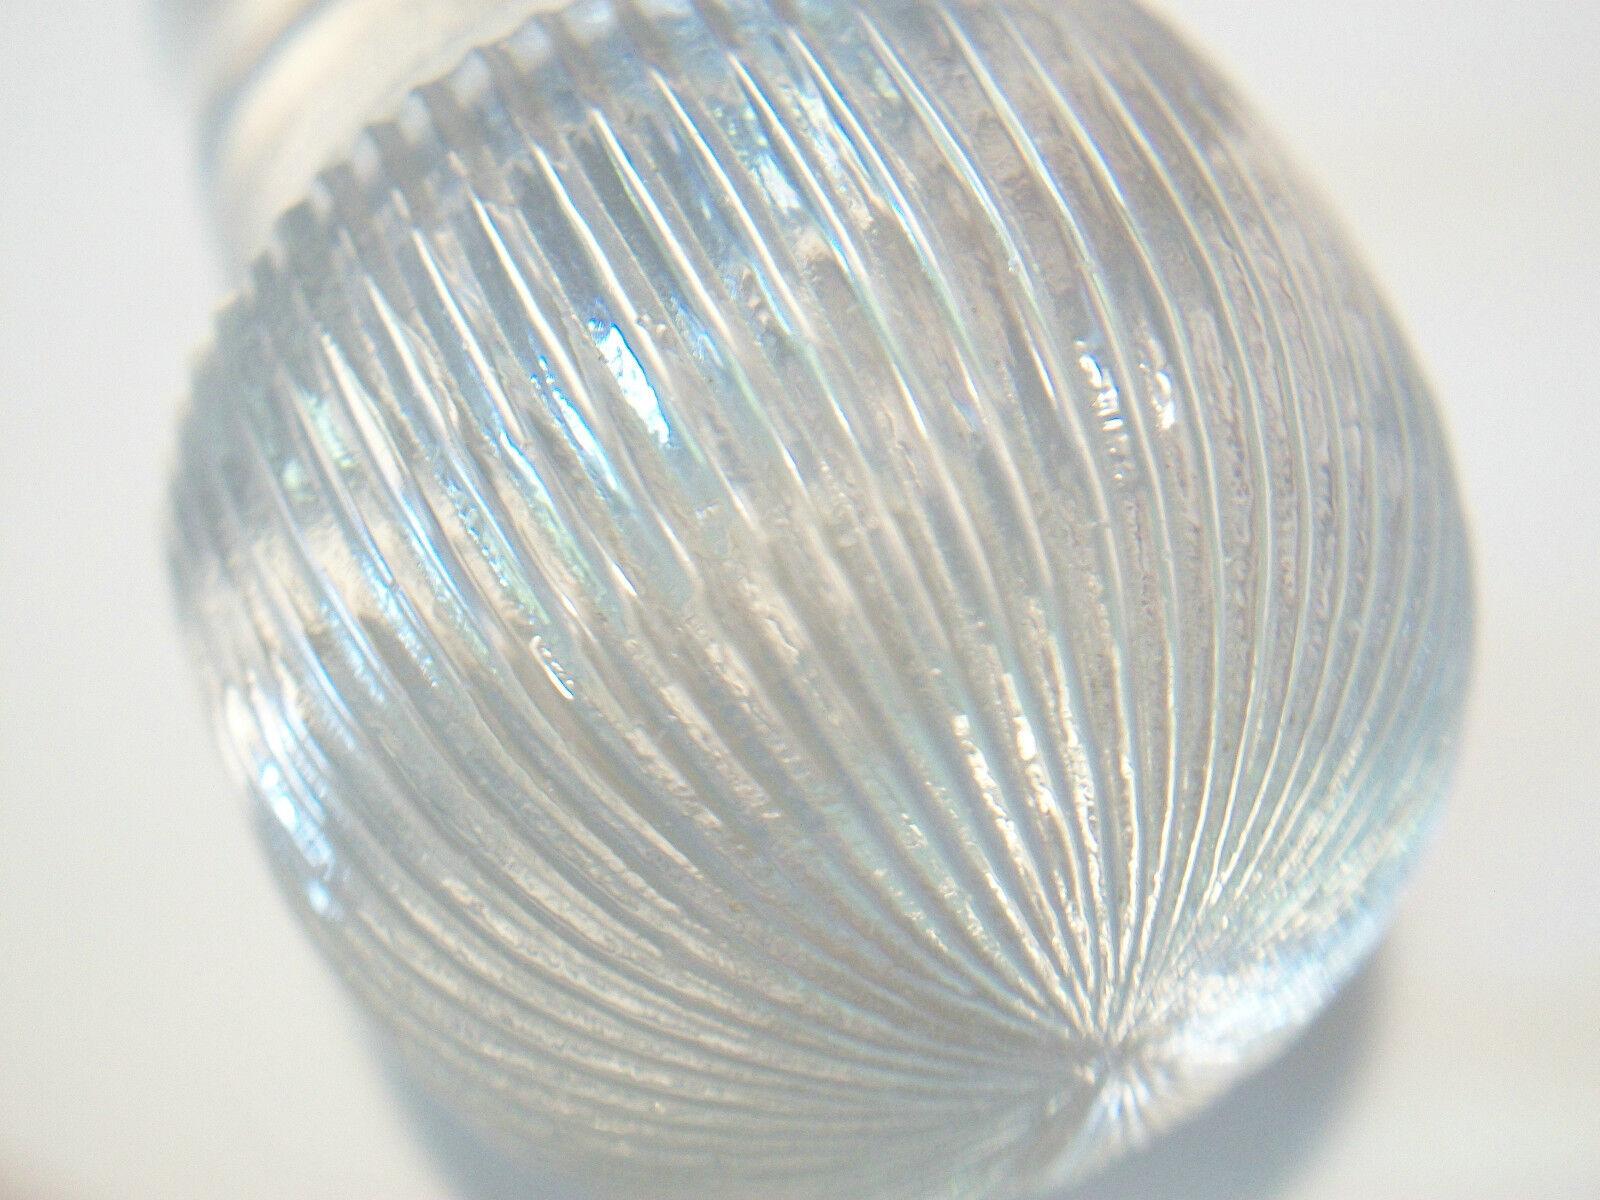 R. LALIQUE - Antique Stopper - Clear Glass - Mushroom Shape - Early 20th Century For Sale 4